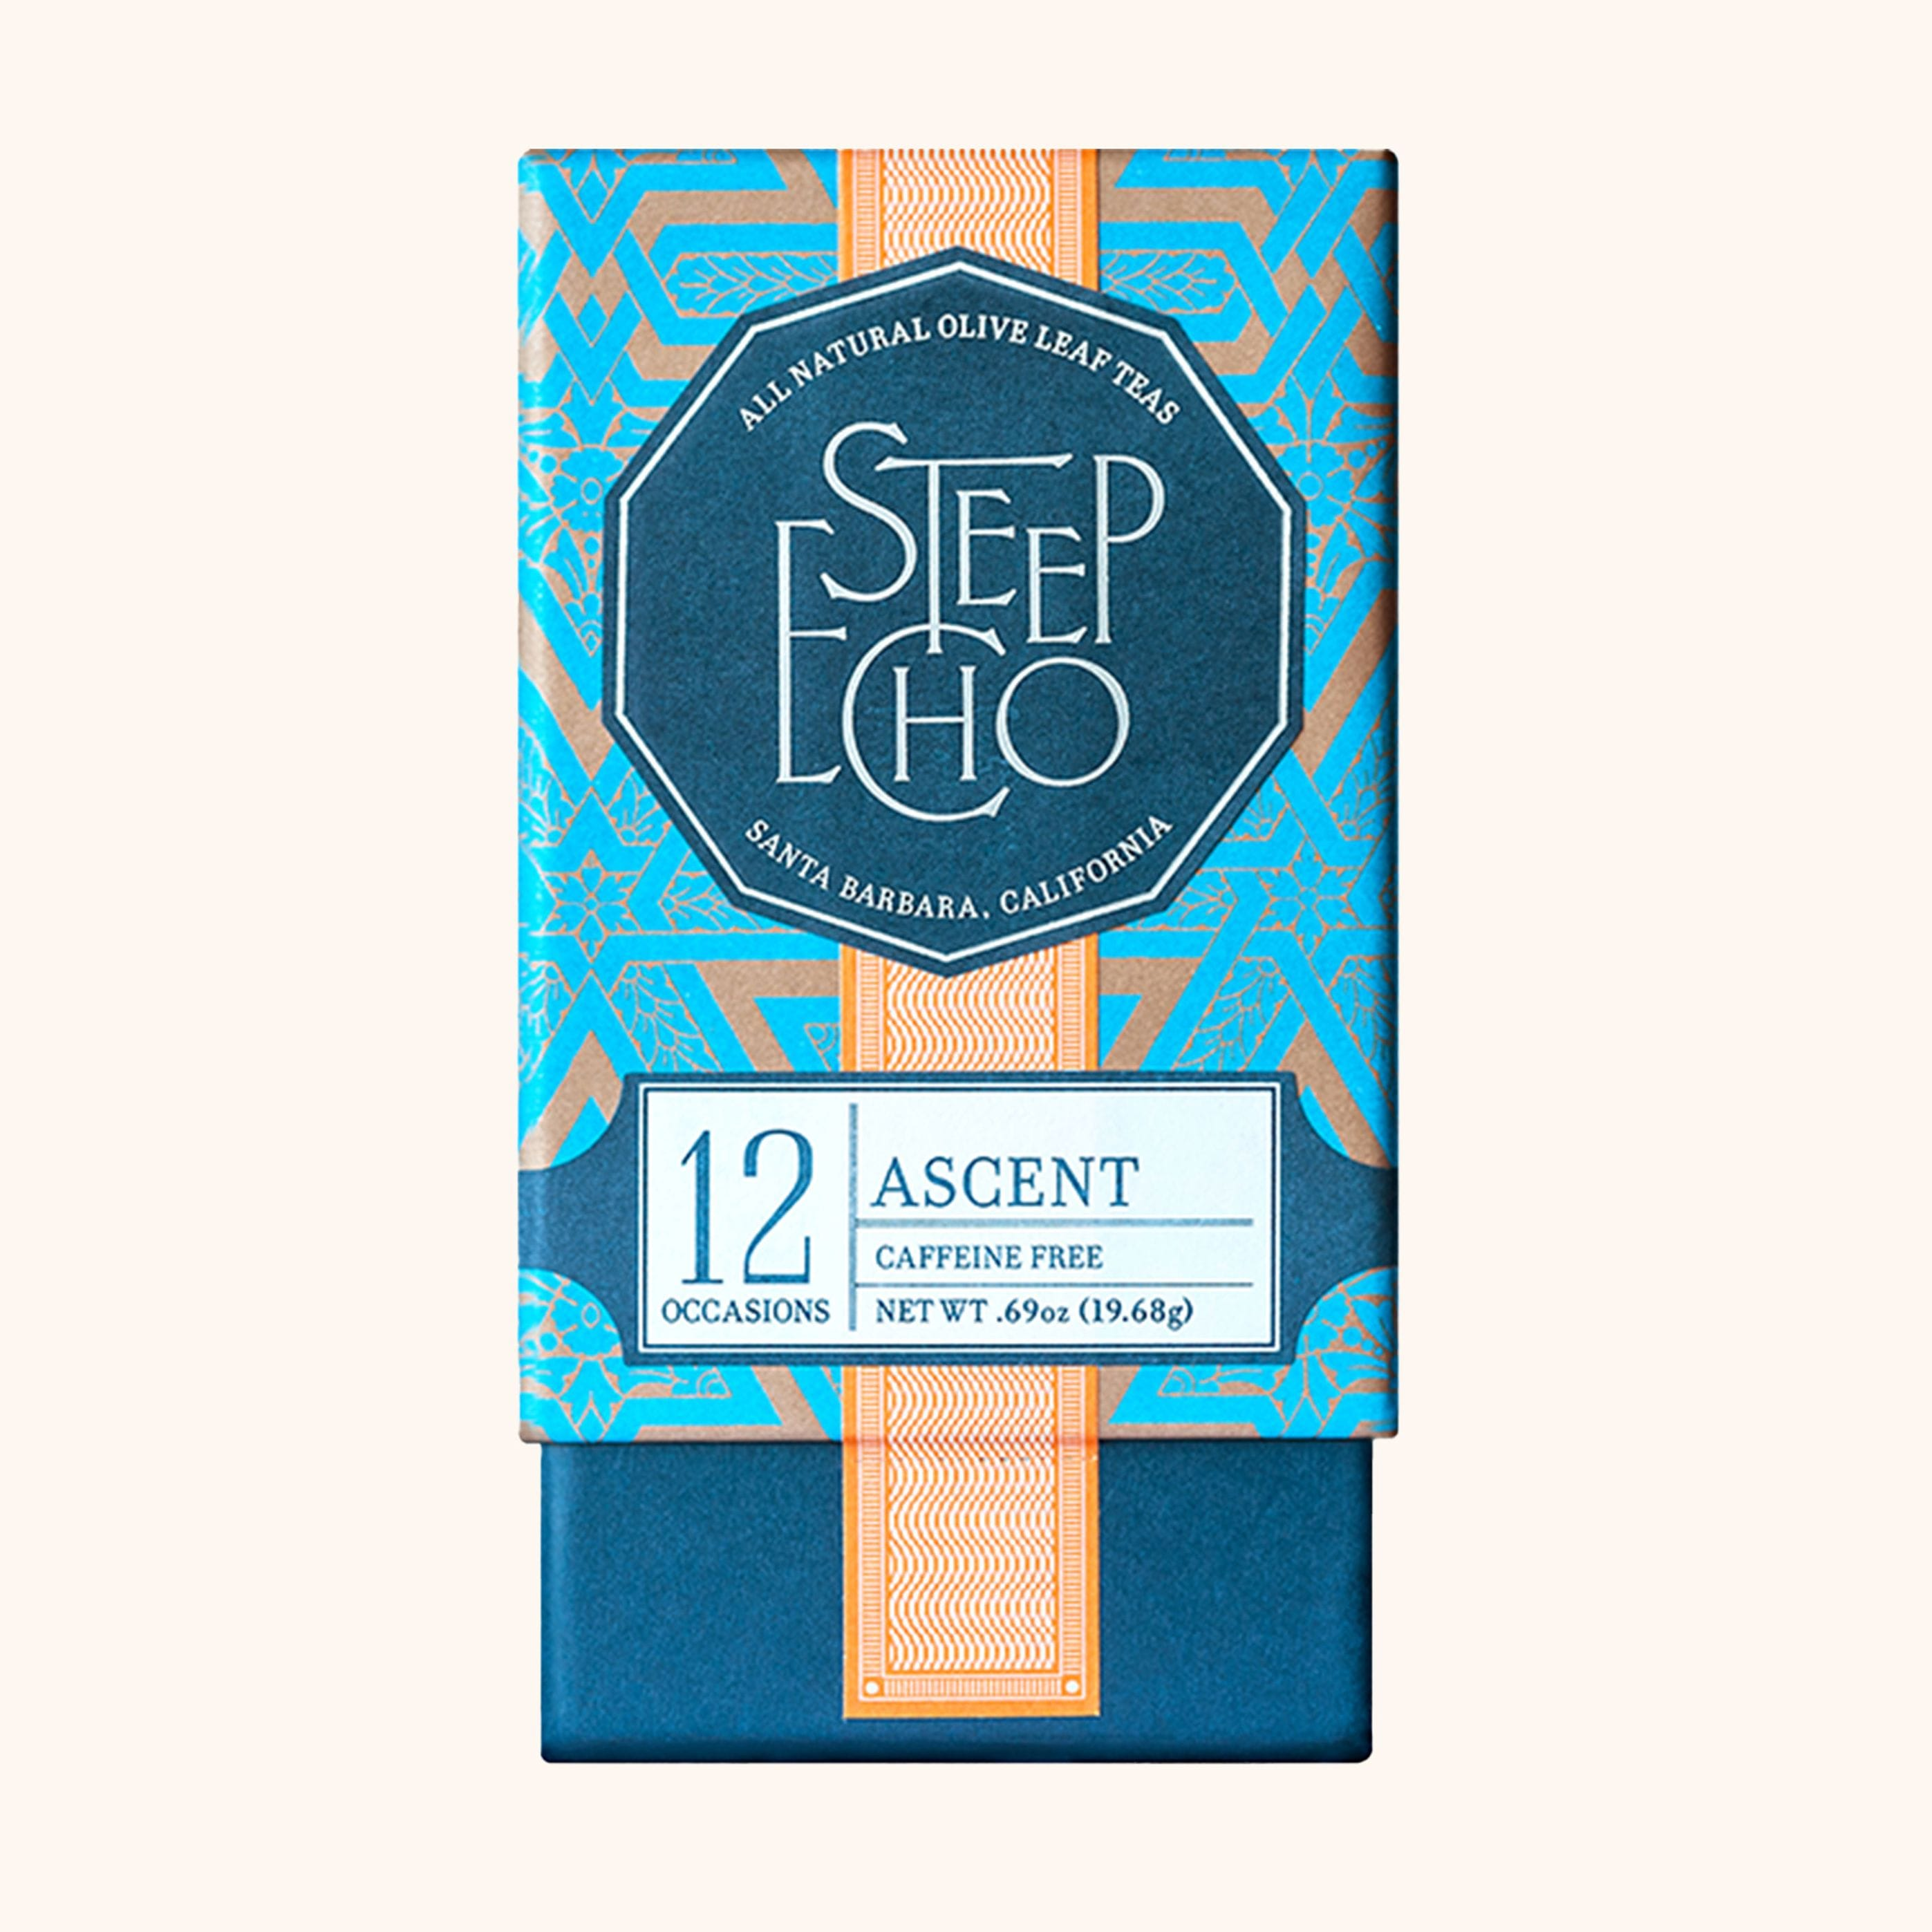 Steep Echo Ascent Tea Package